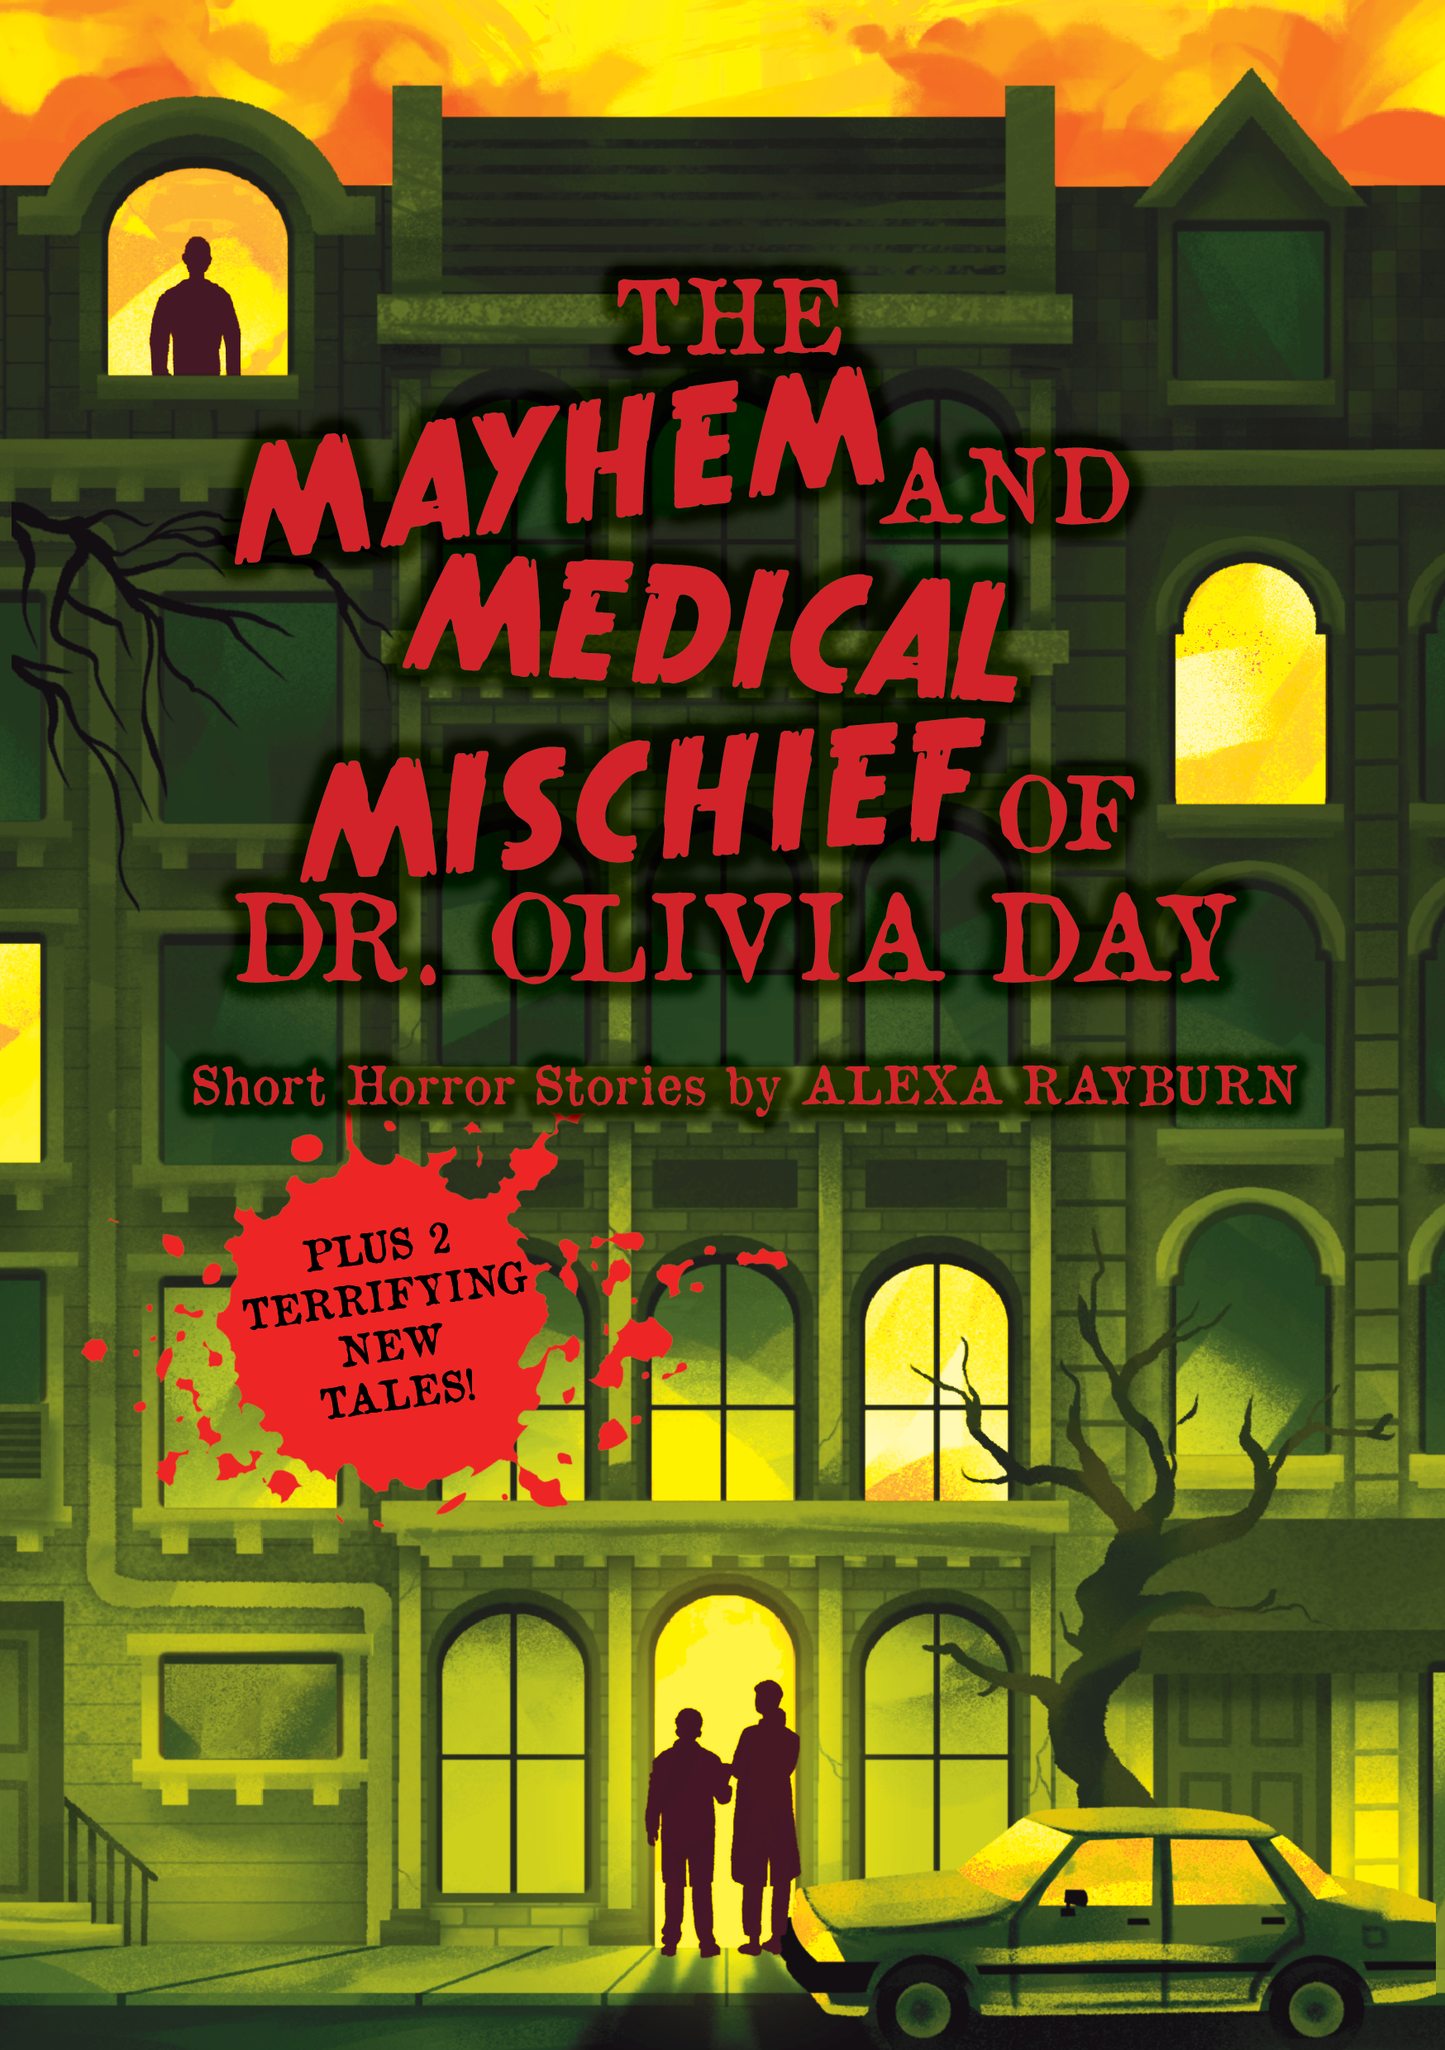 The Mayhem and Medical Mischief of Dr. Olivia Day